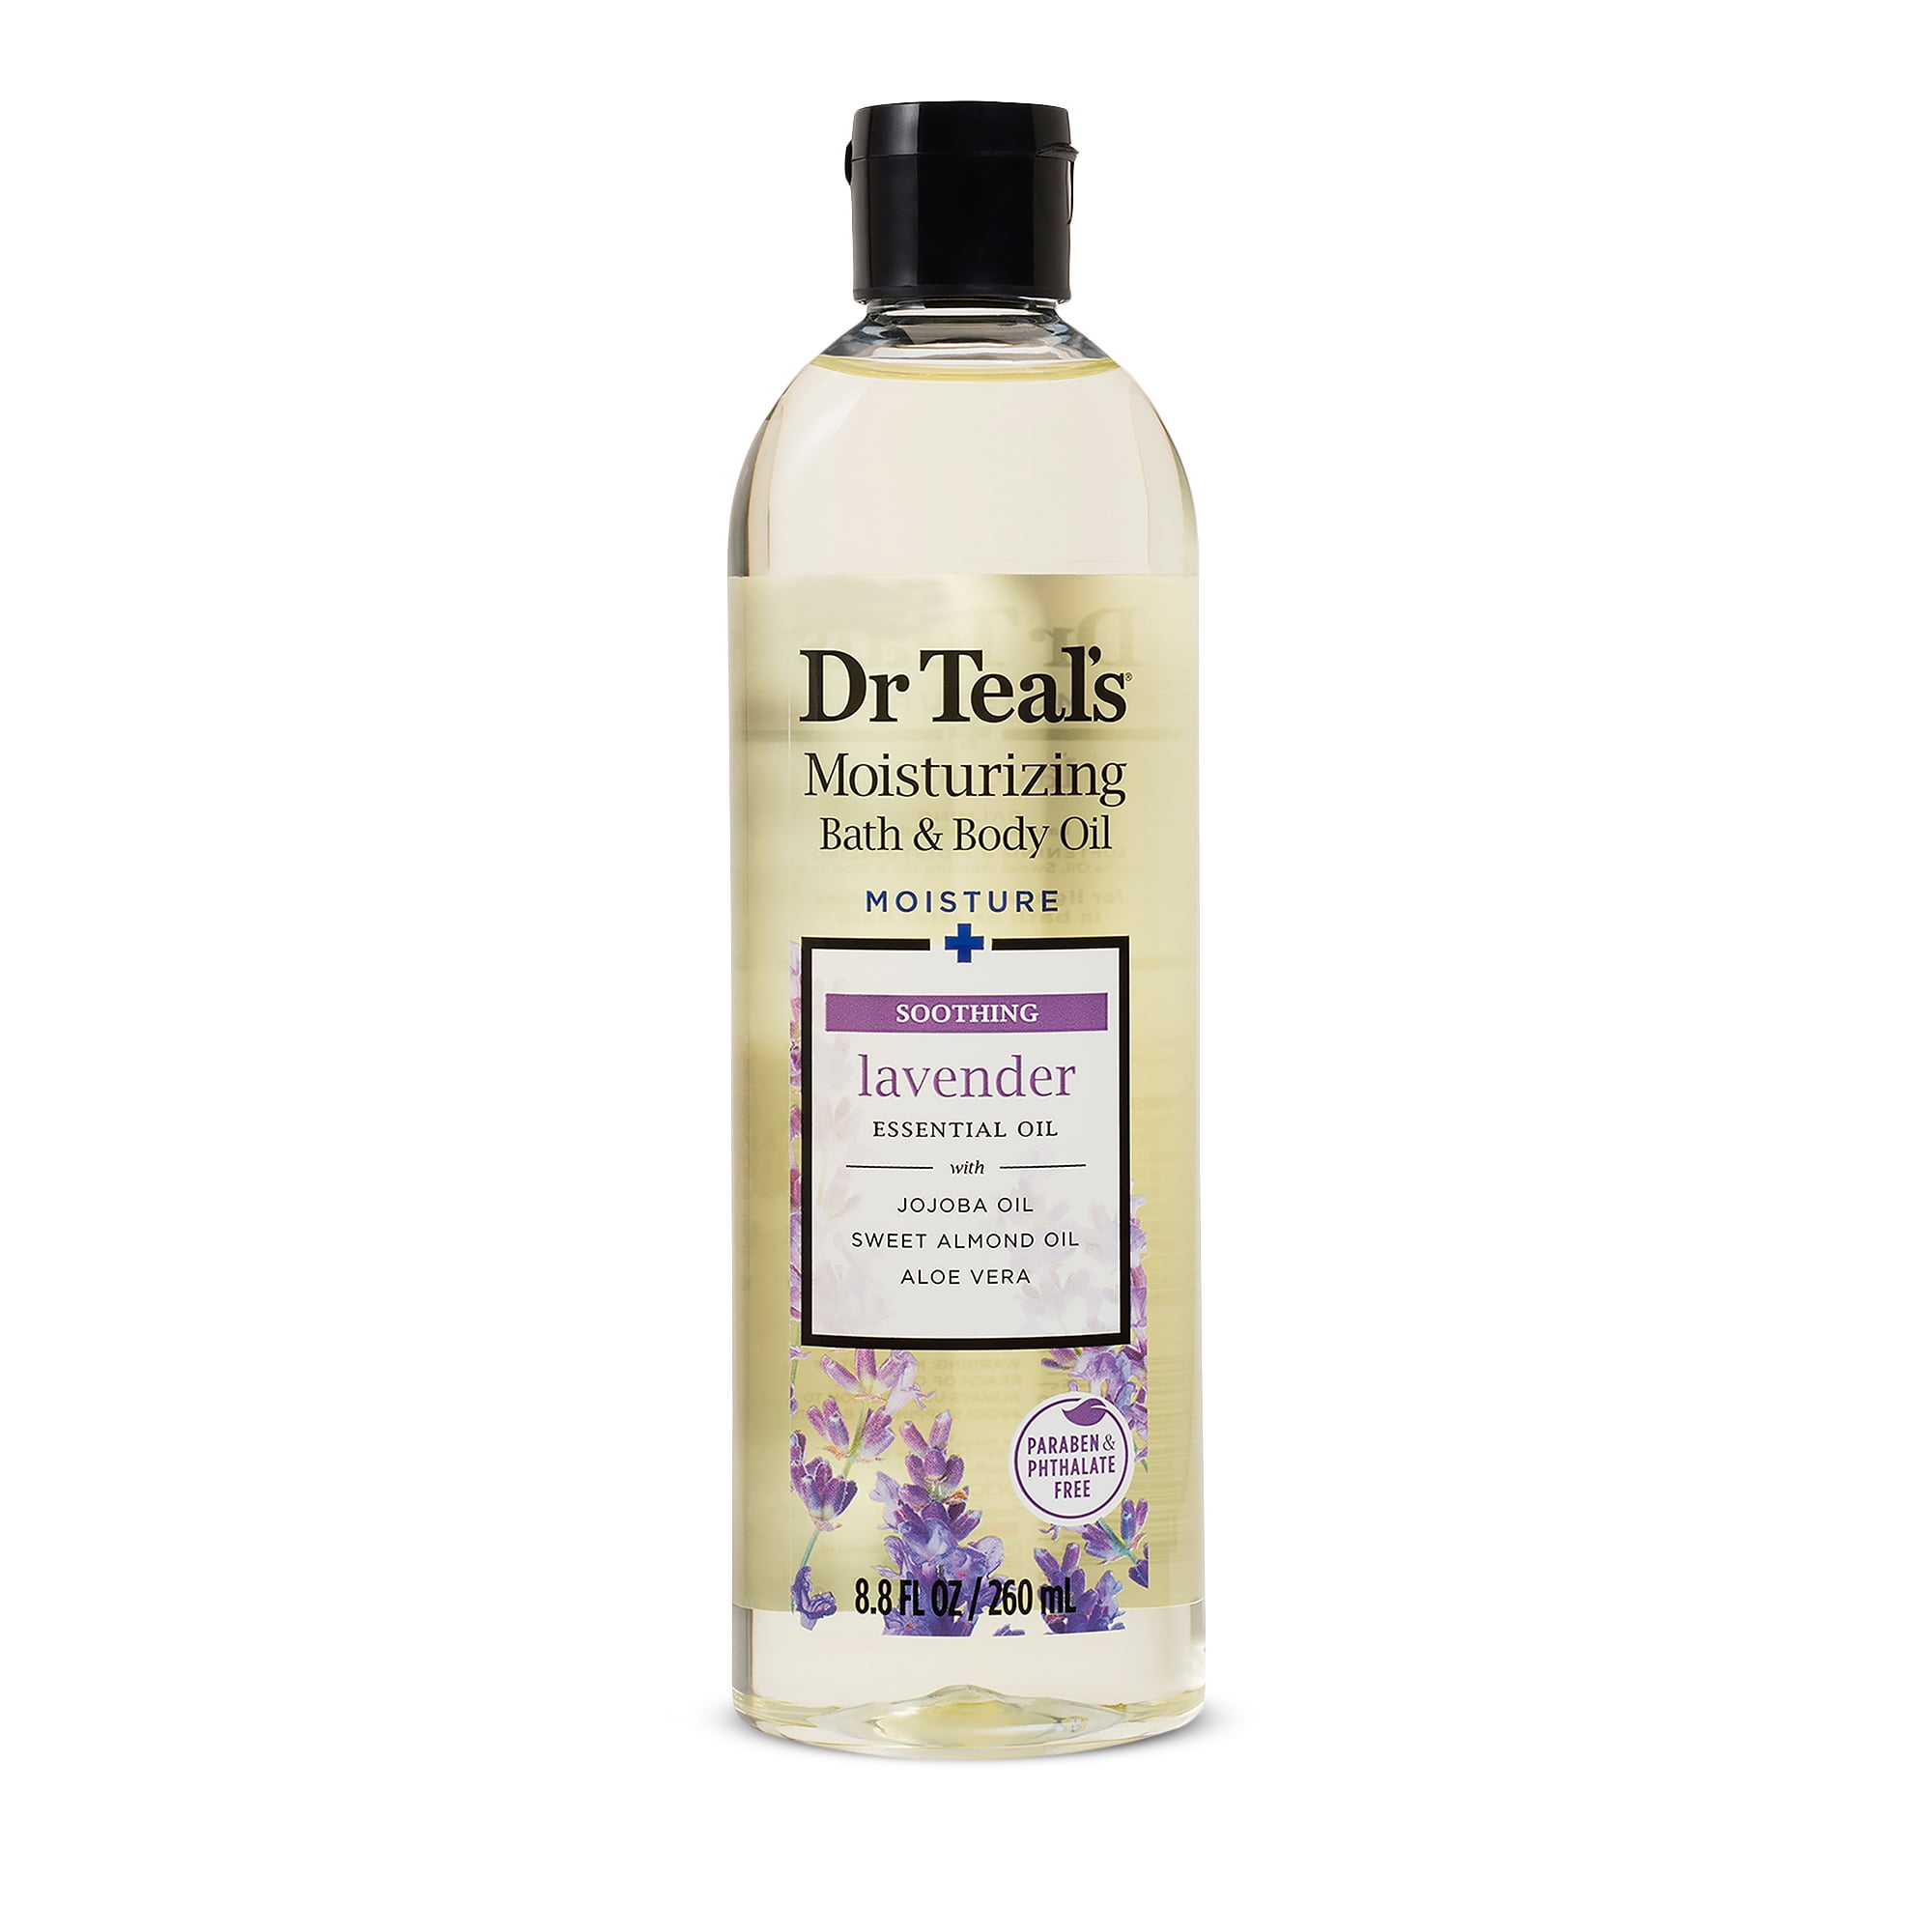 Dr Teal's Bath and Body Oil, Moisture + Soothing with Lavender Essential Oil, 8.8 fl oz.